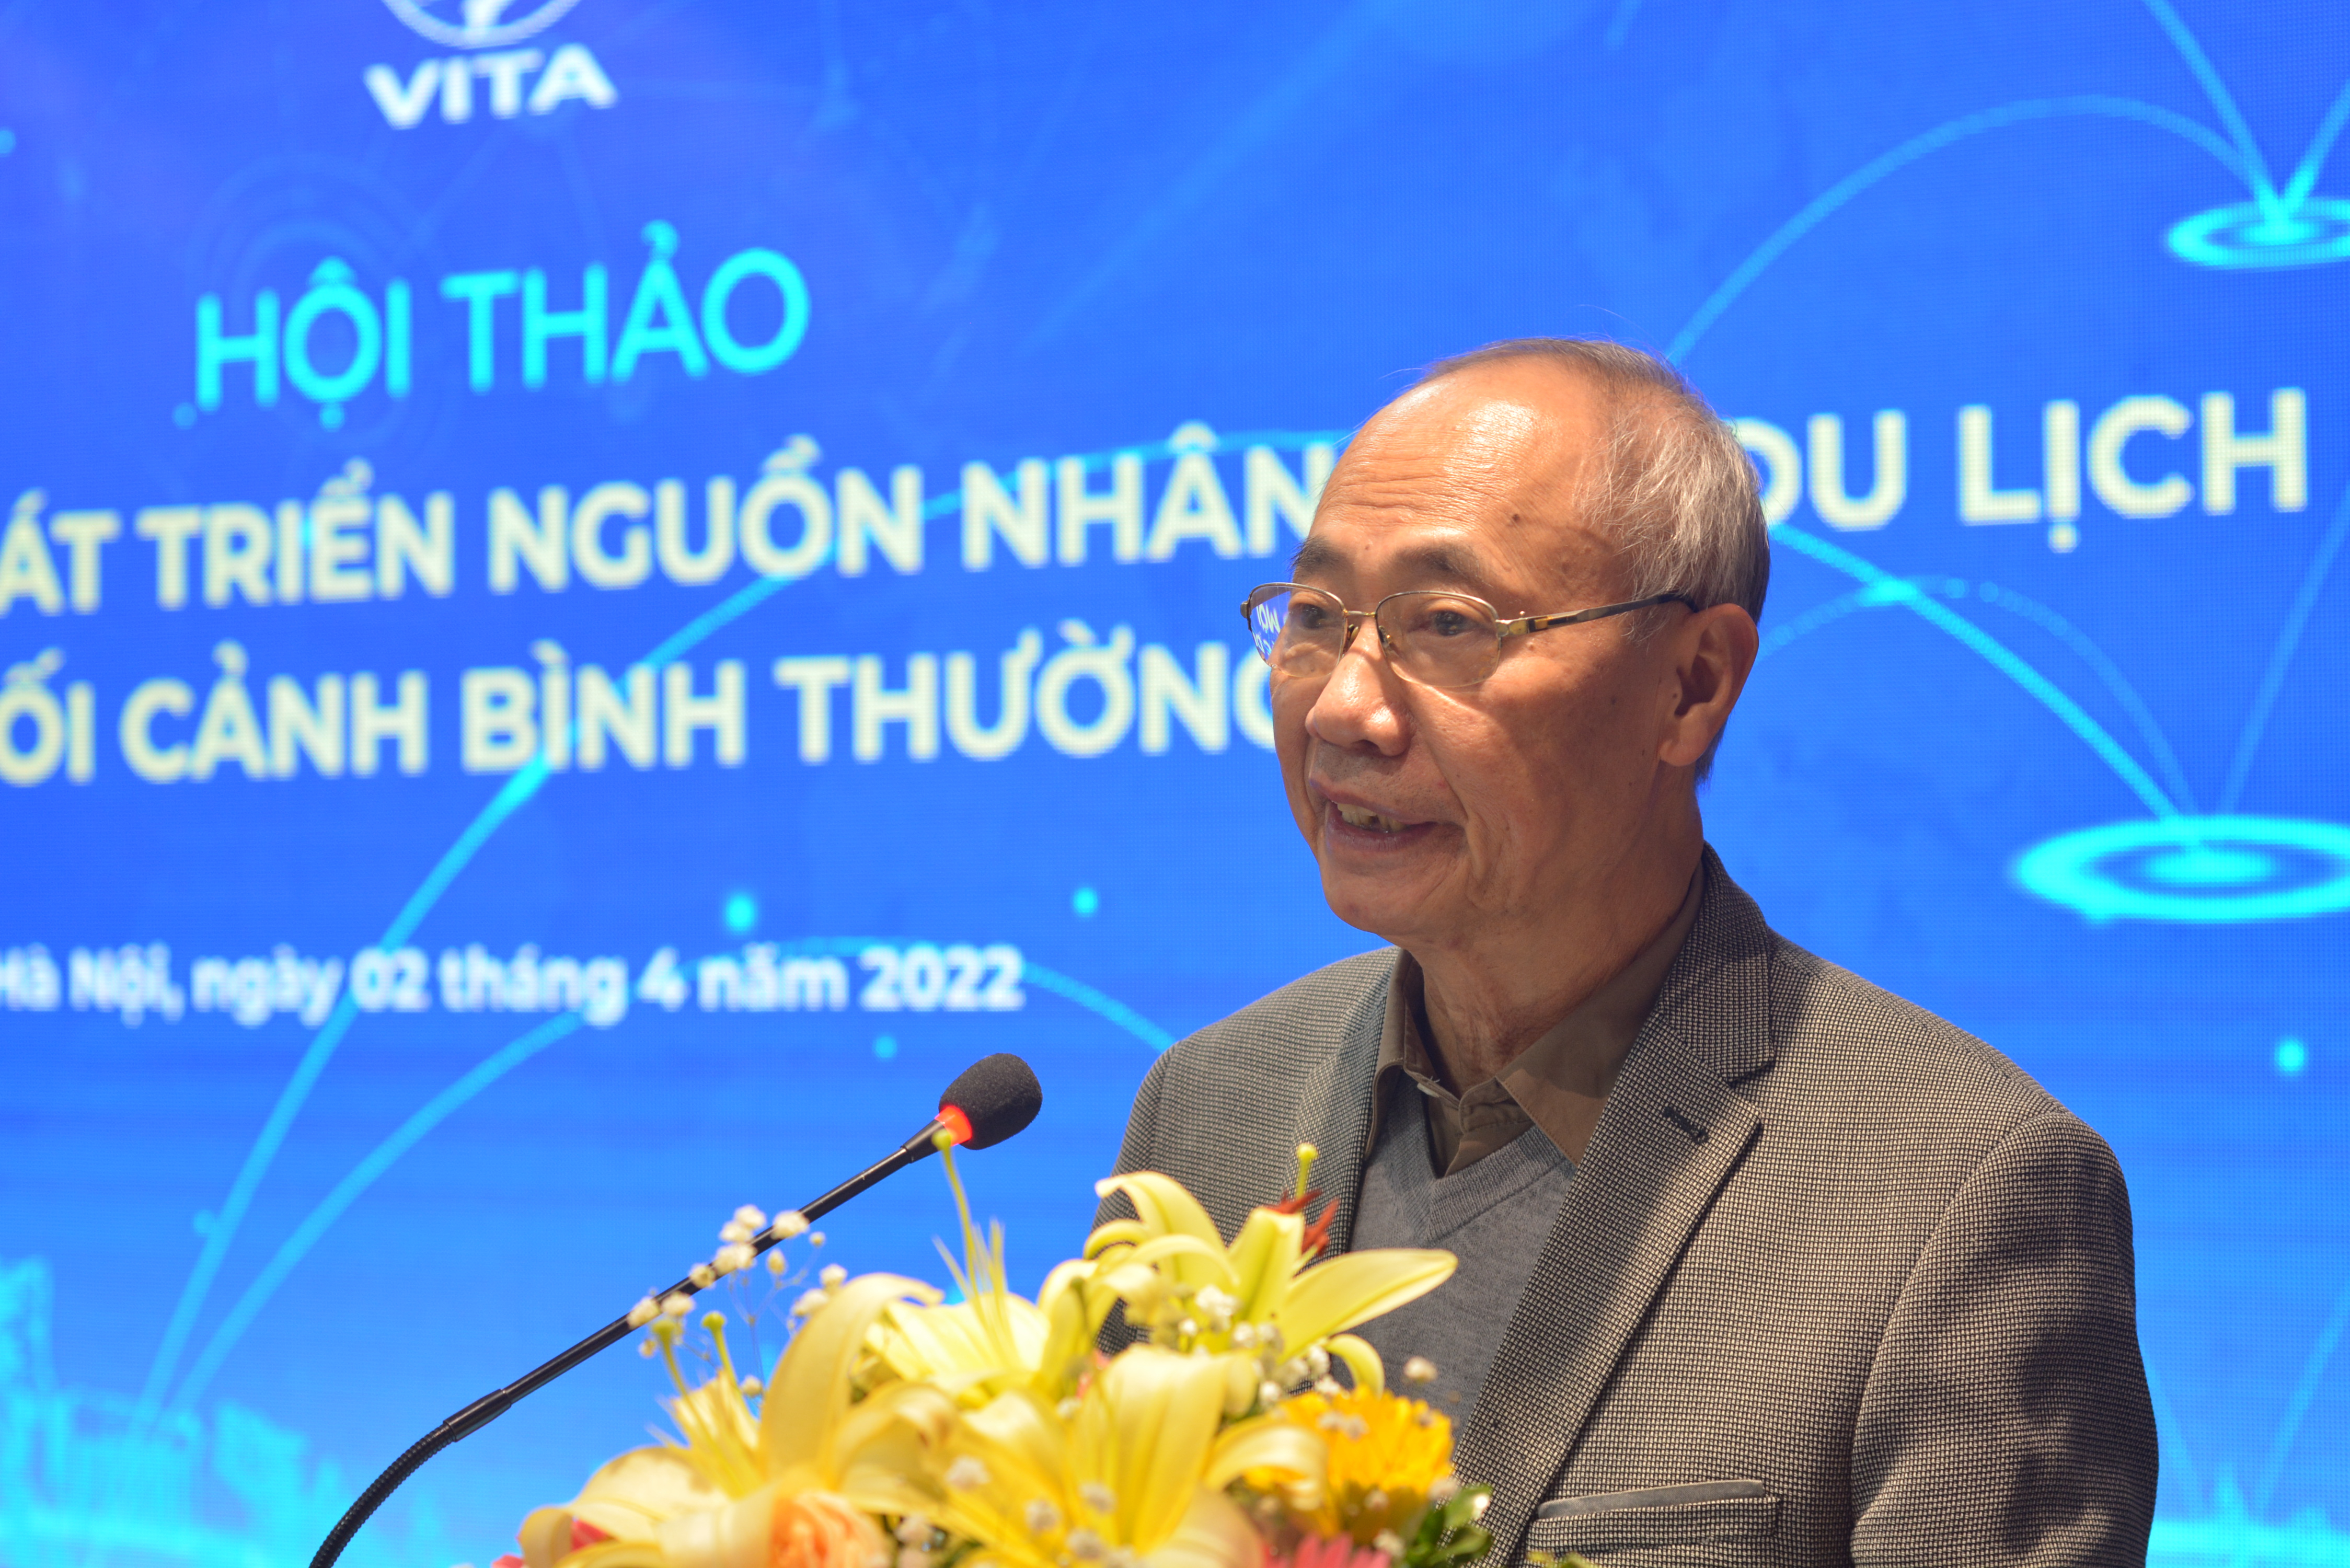 According to Mr. Vu The Binh - Chairman of the Vietnam Tourism Association, it is necessary to give some orientations and solutions to ensure human resources recover after the pandemic.